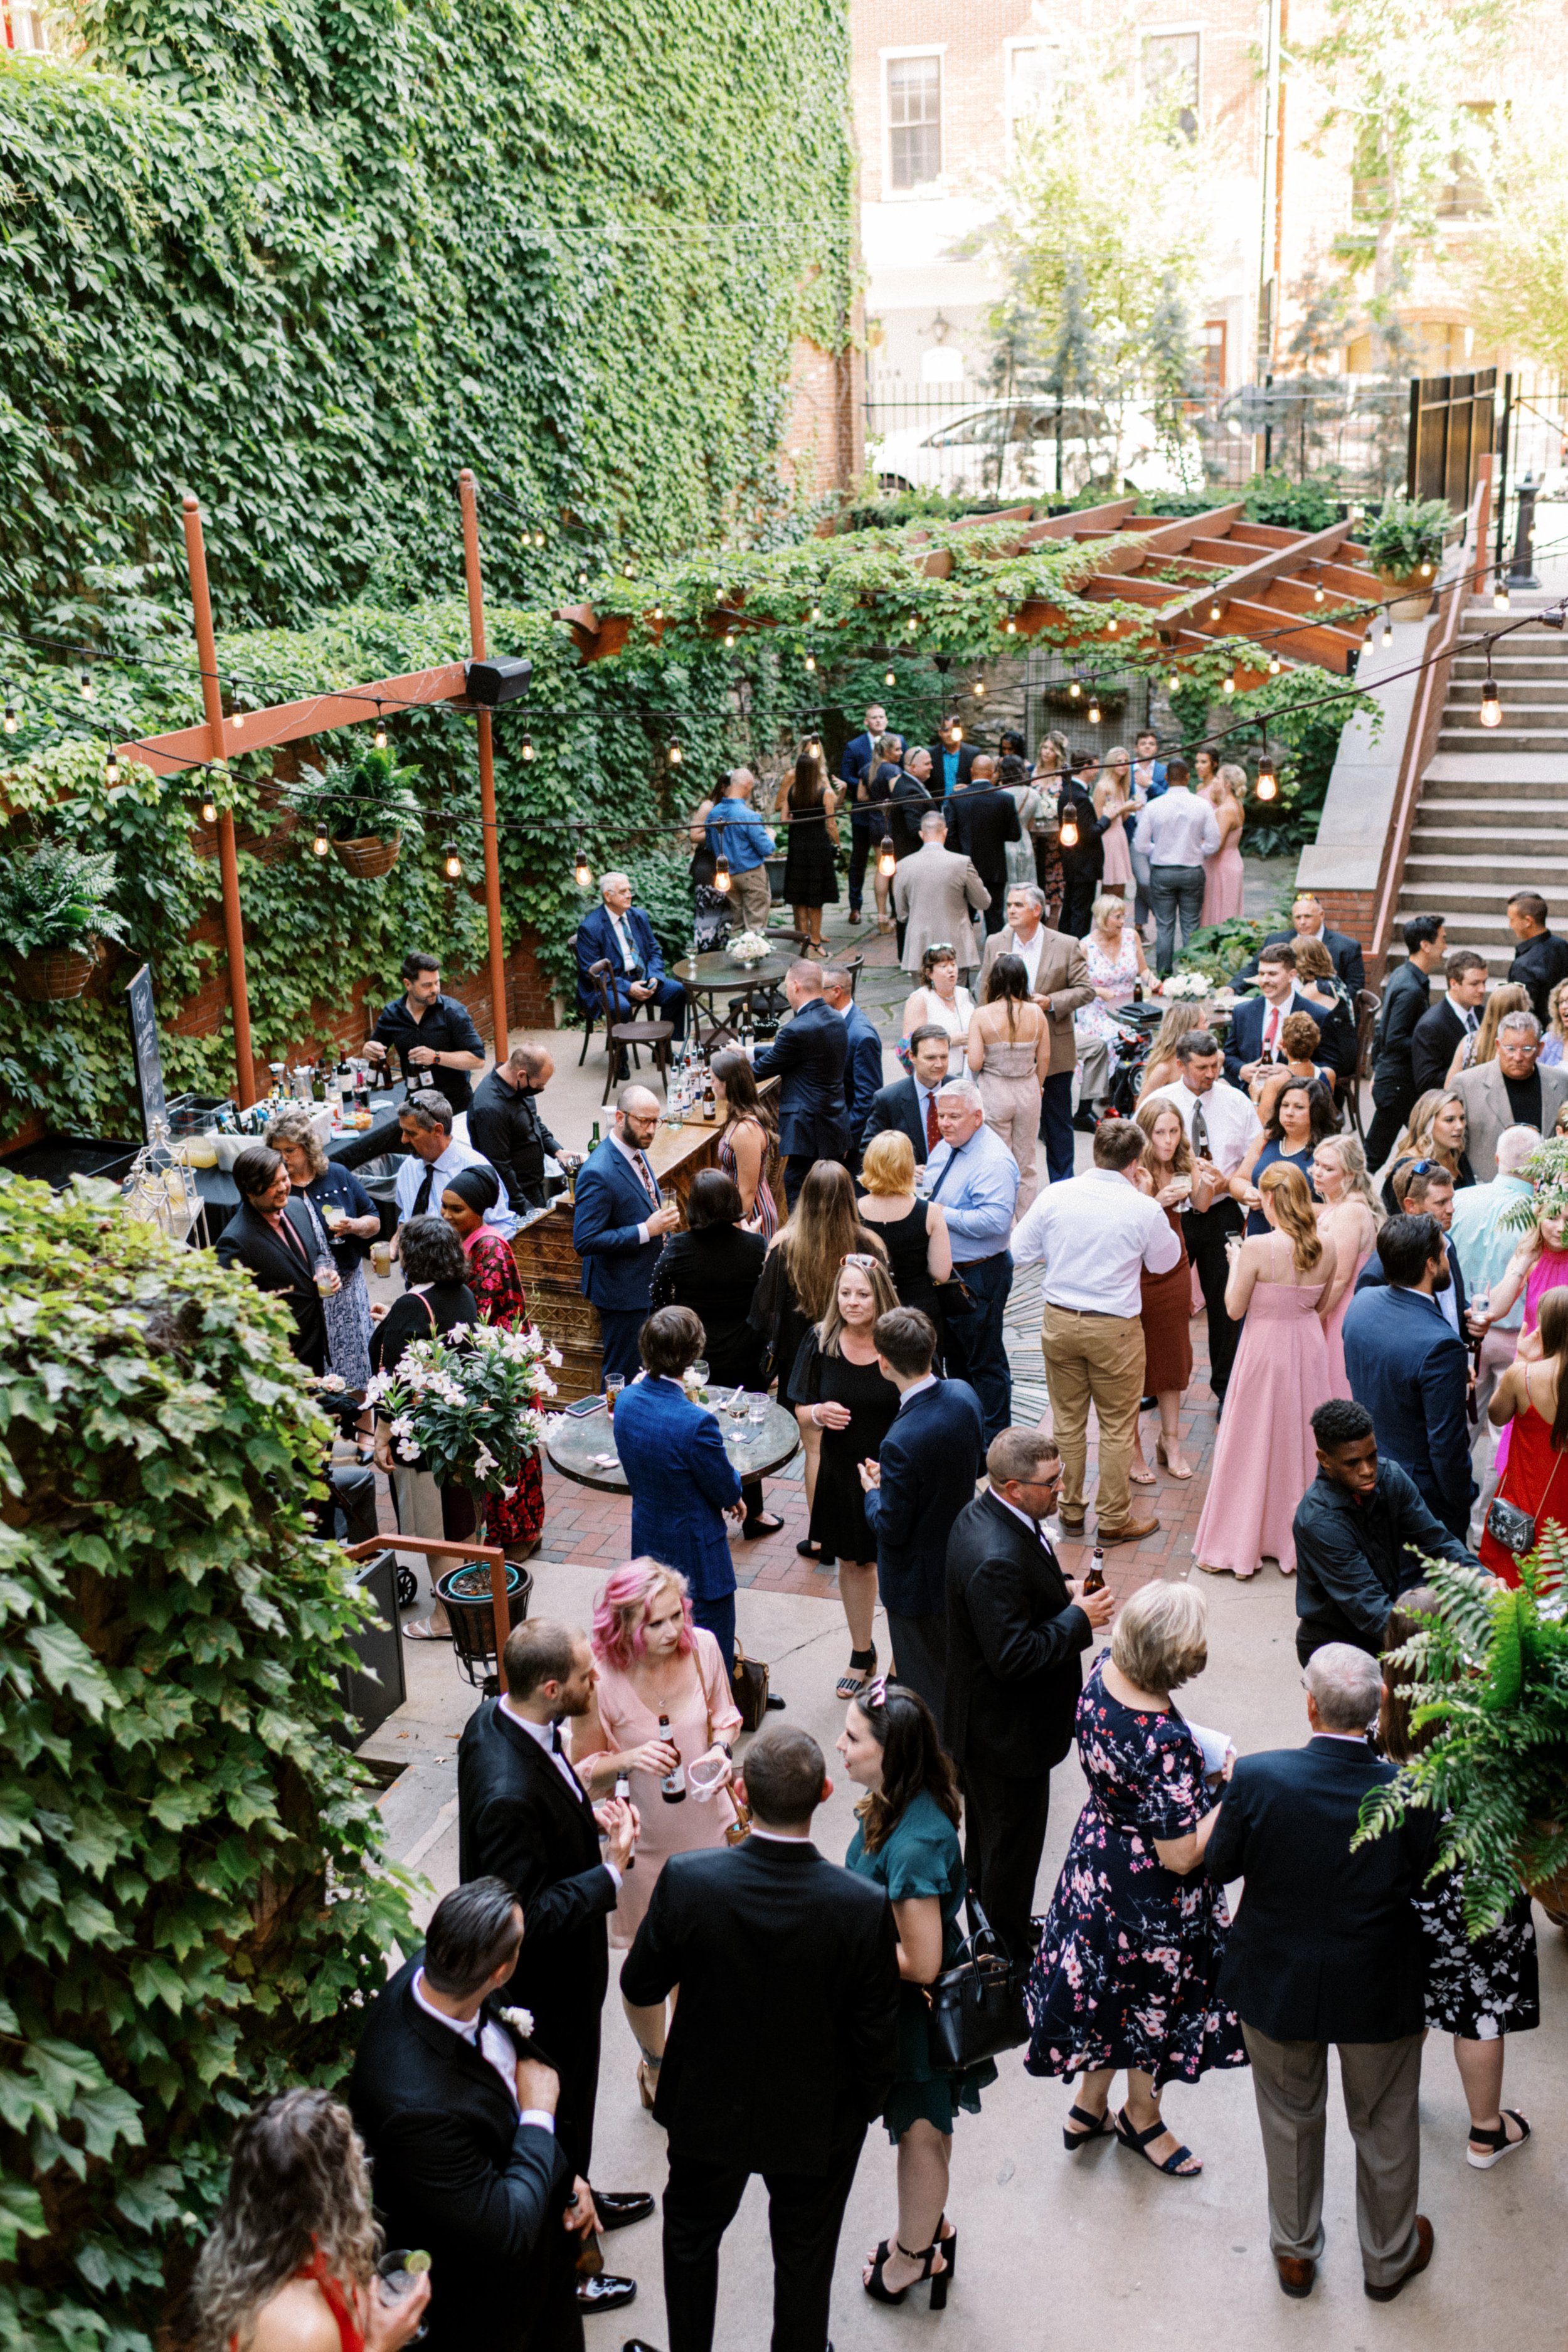 Event reception outdoors surrounded by greenery plants downtown